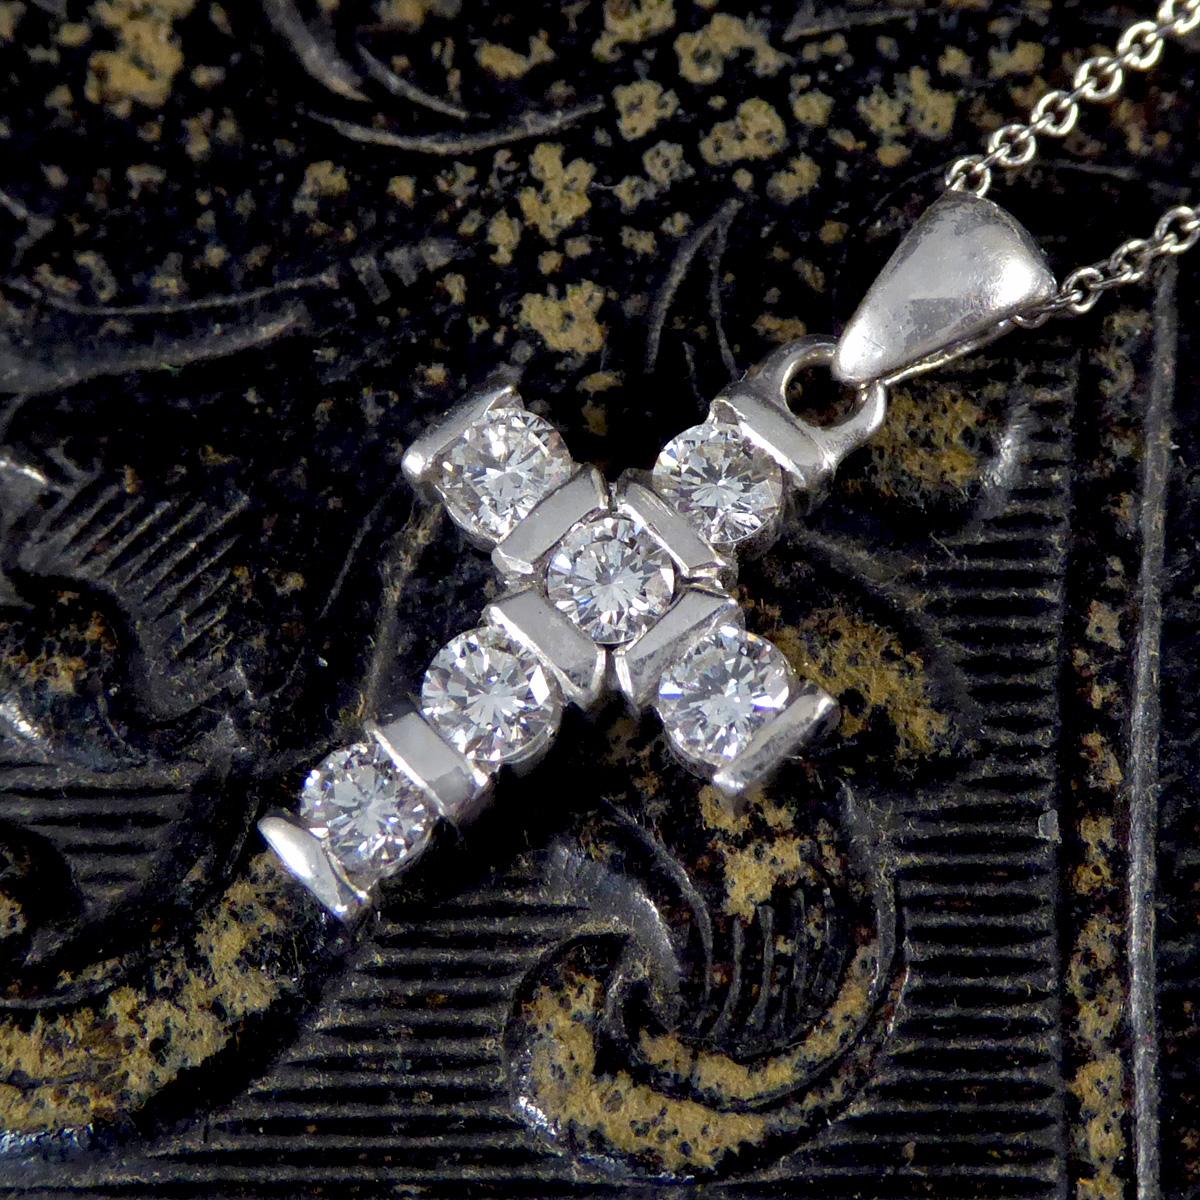 This Diamond set cross pendant necklace in 18ct White Gold is a symbol of faith and elegance, exquisitely crafted to be a cherished piece in any collection. The pendant features a classic cross design, beautifully adorned with meticulously selected